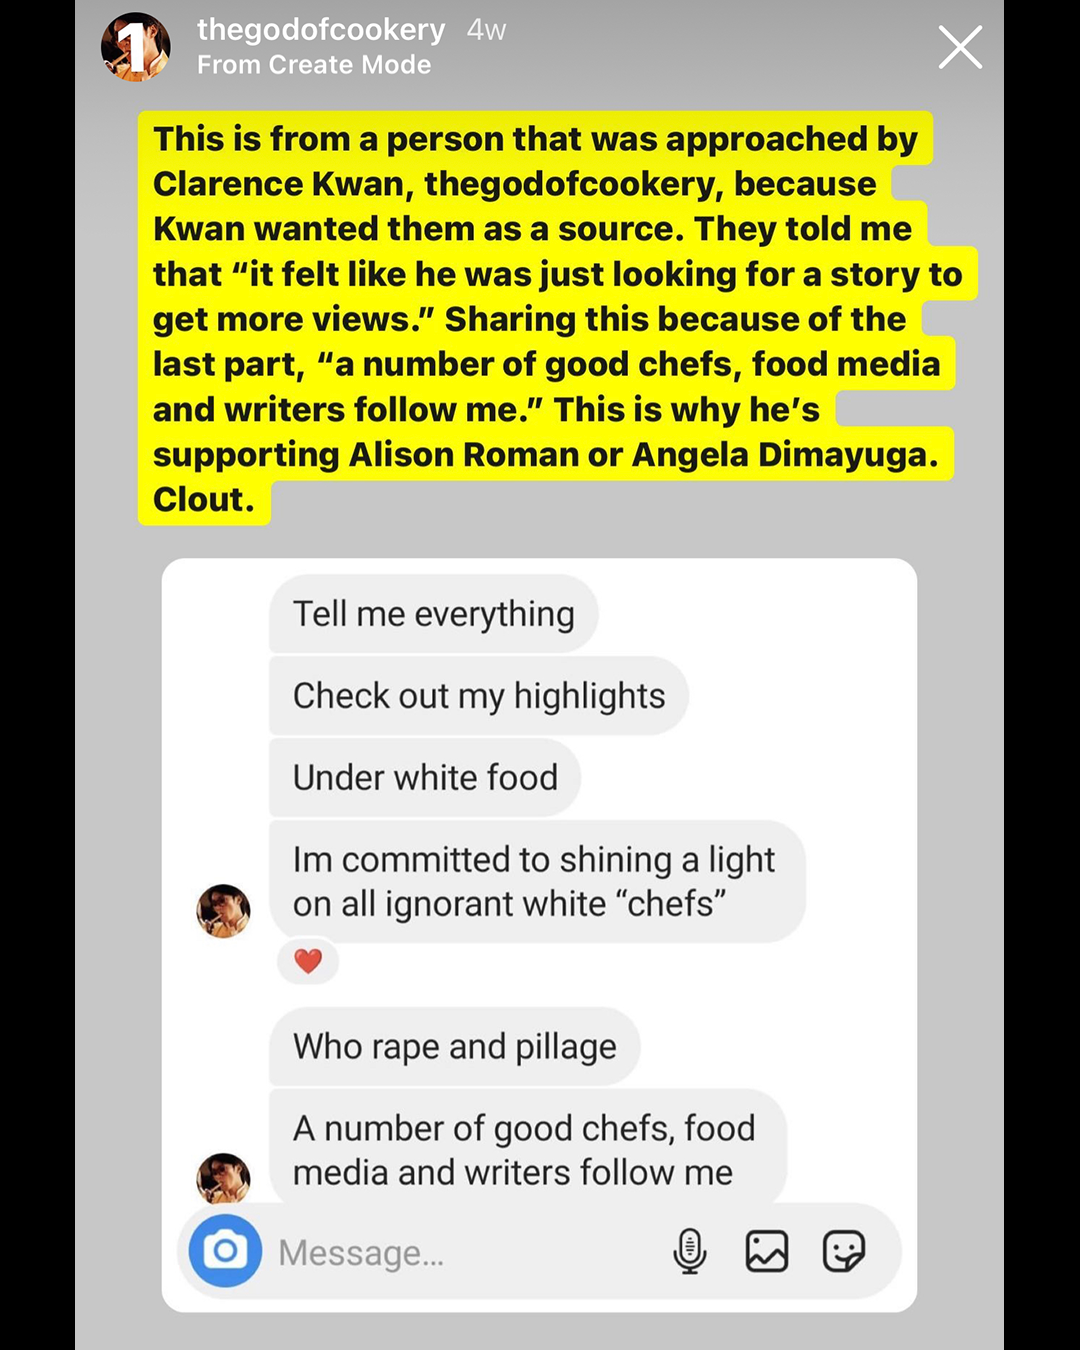 Screenshot of an Instagram Story with a DM of Clarence Kwan bragging about the high-profile food figures that follow him. He used the language <q>rape and pillage</q> to describe food appropriation.